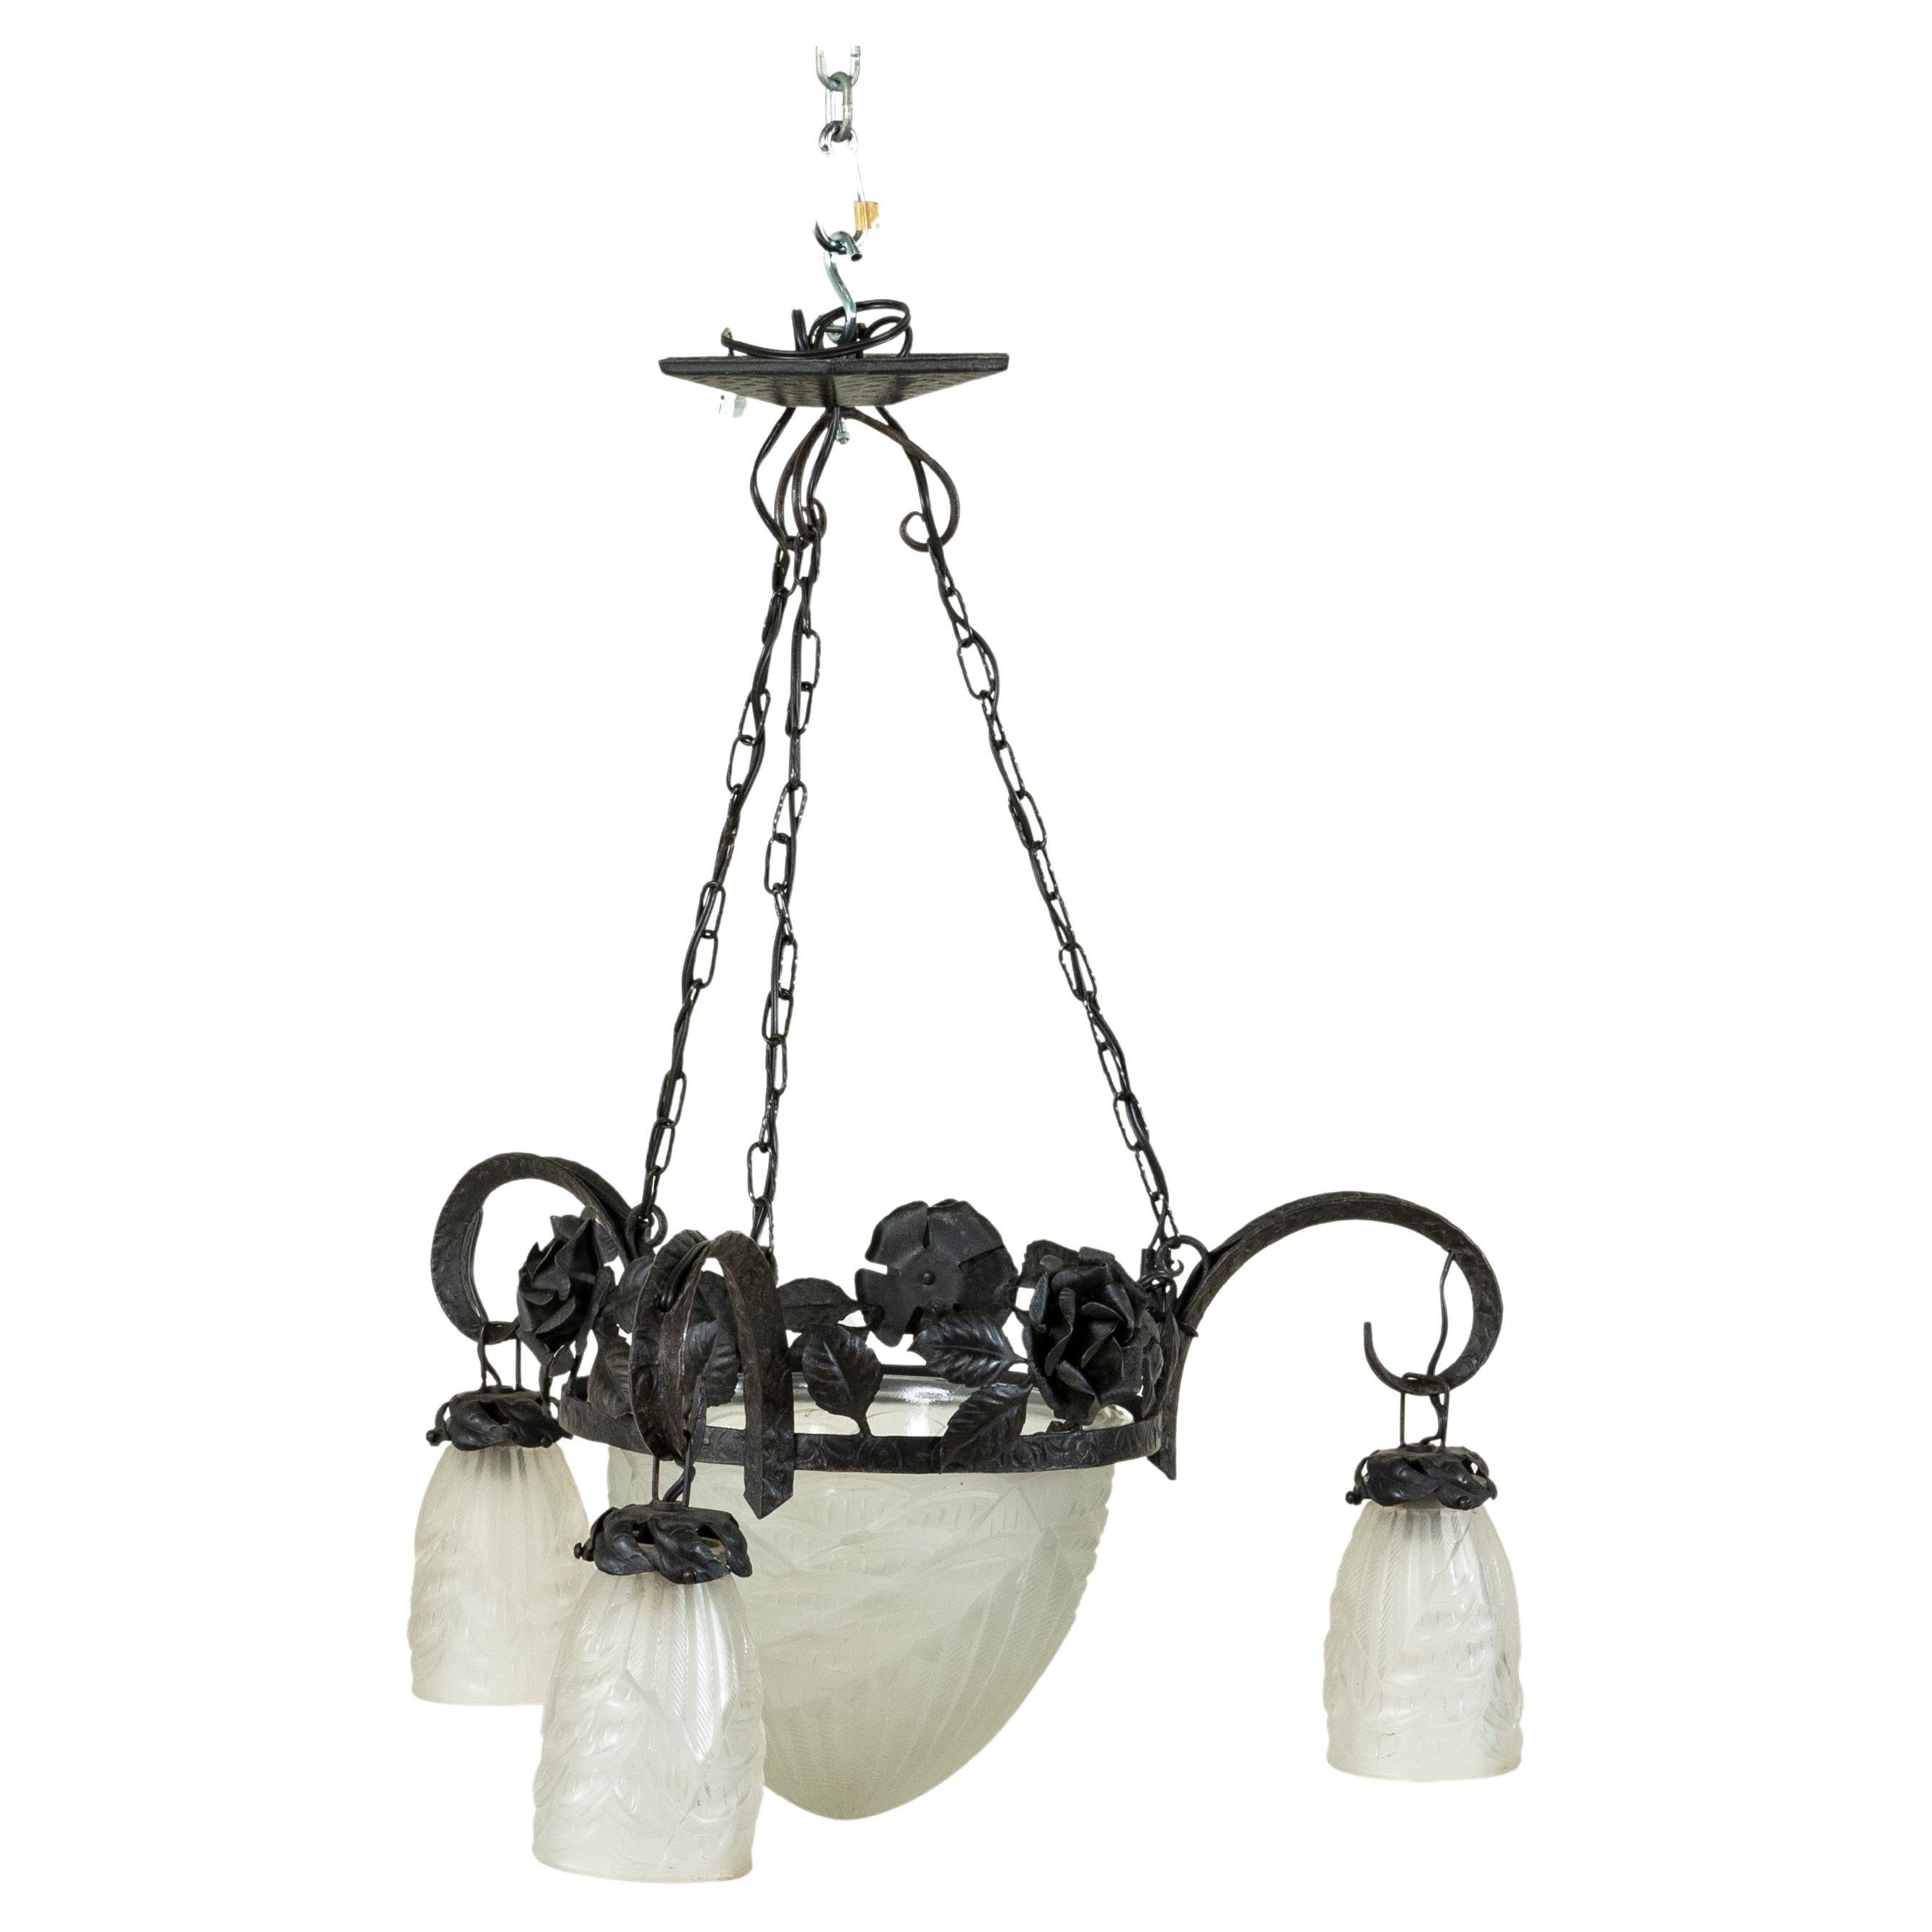 A blend of Art Deco and Art Nouveau, this early twentieth century French iron and glass chandelier features a central wreath of iron roses and leaves suspended from three chains joined to the ceiling mount. A central frosted glass globe finished